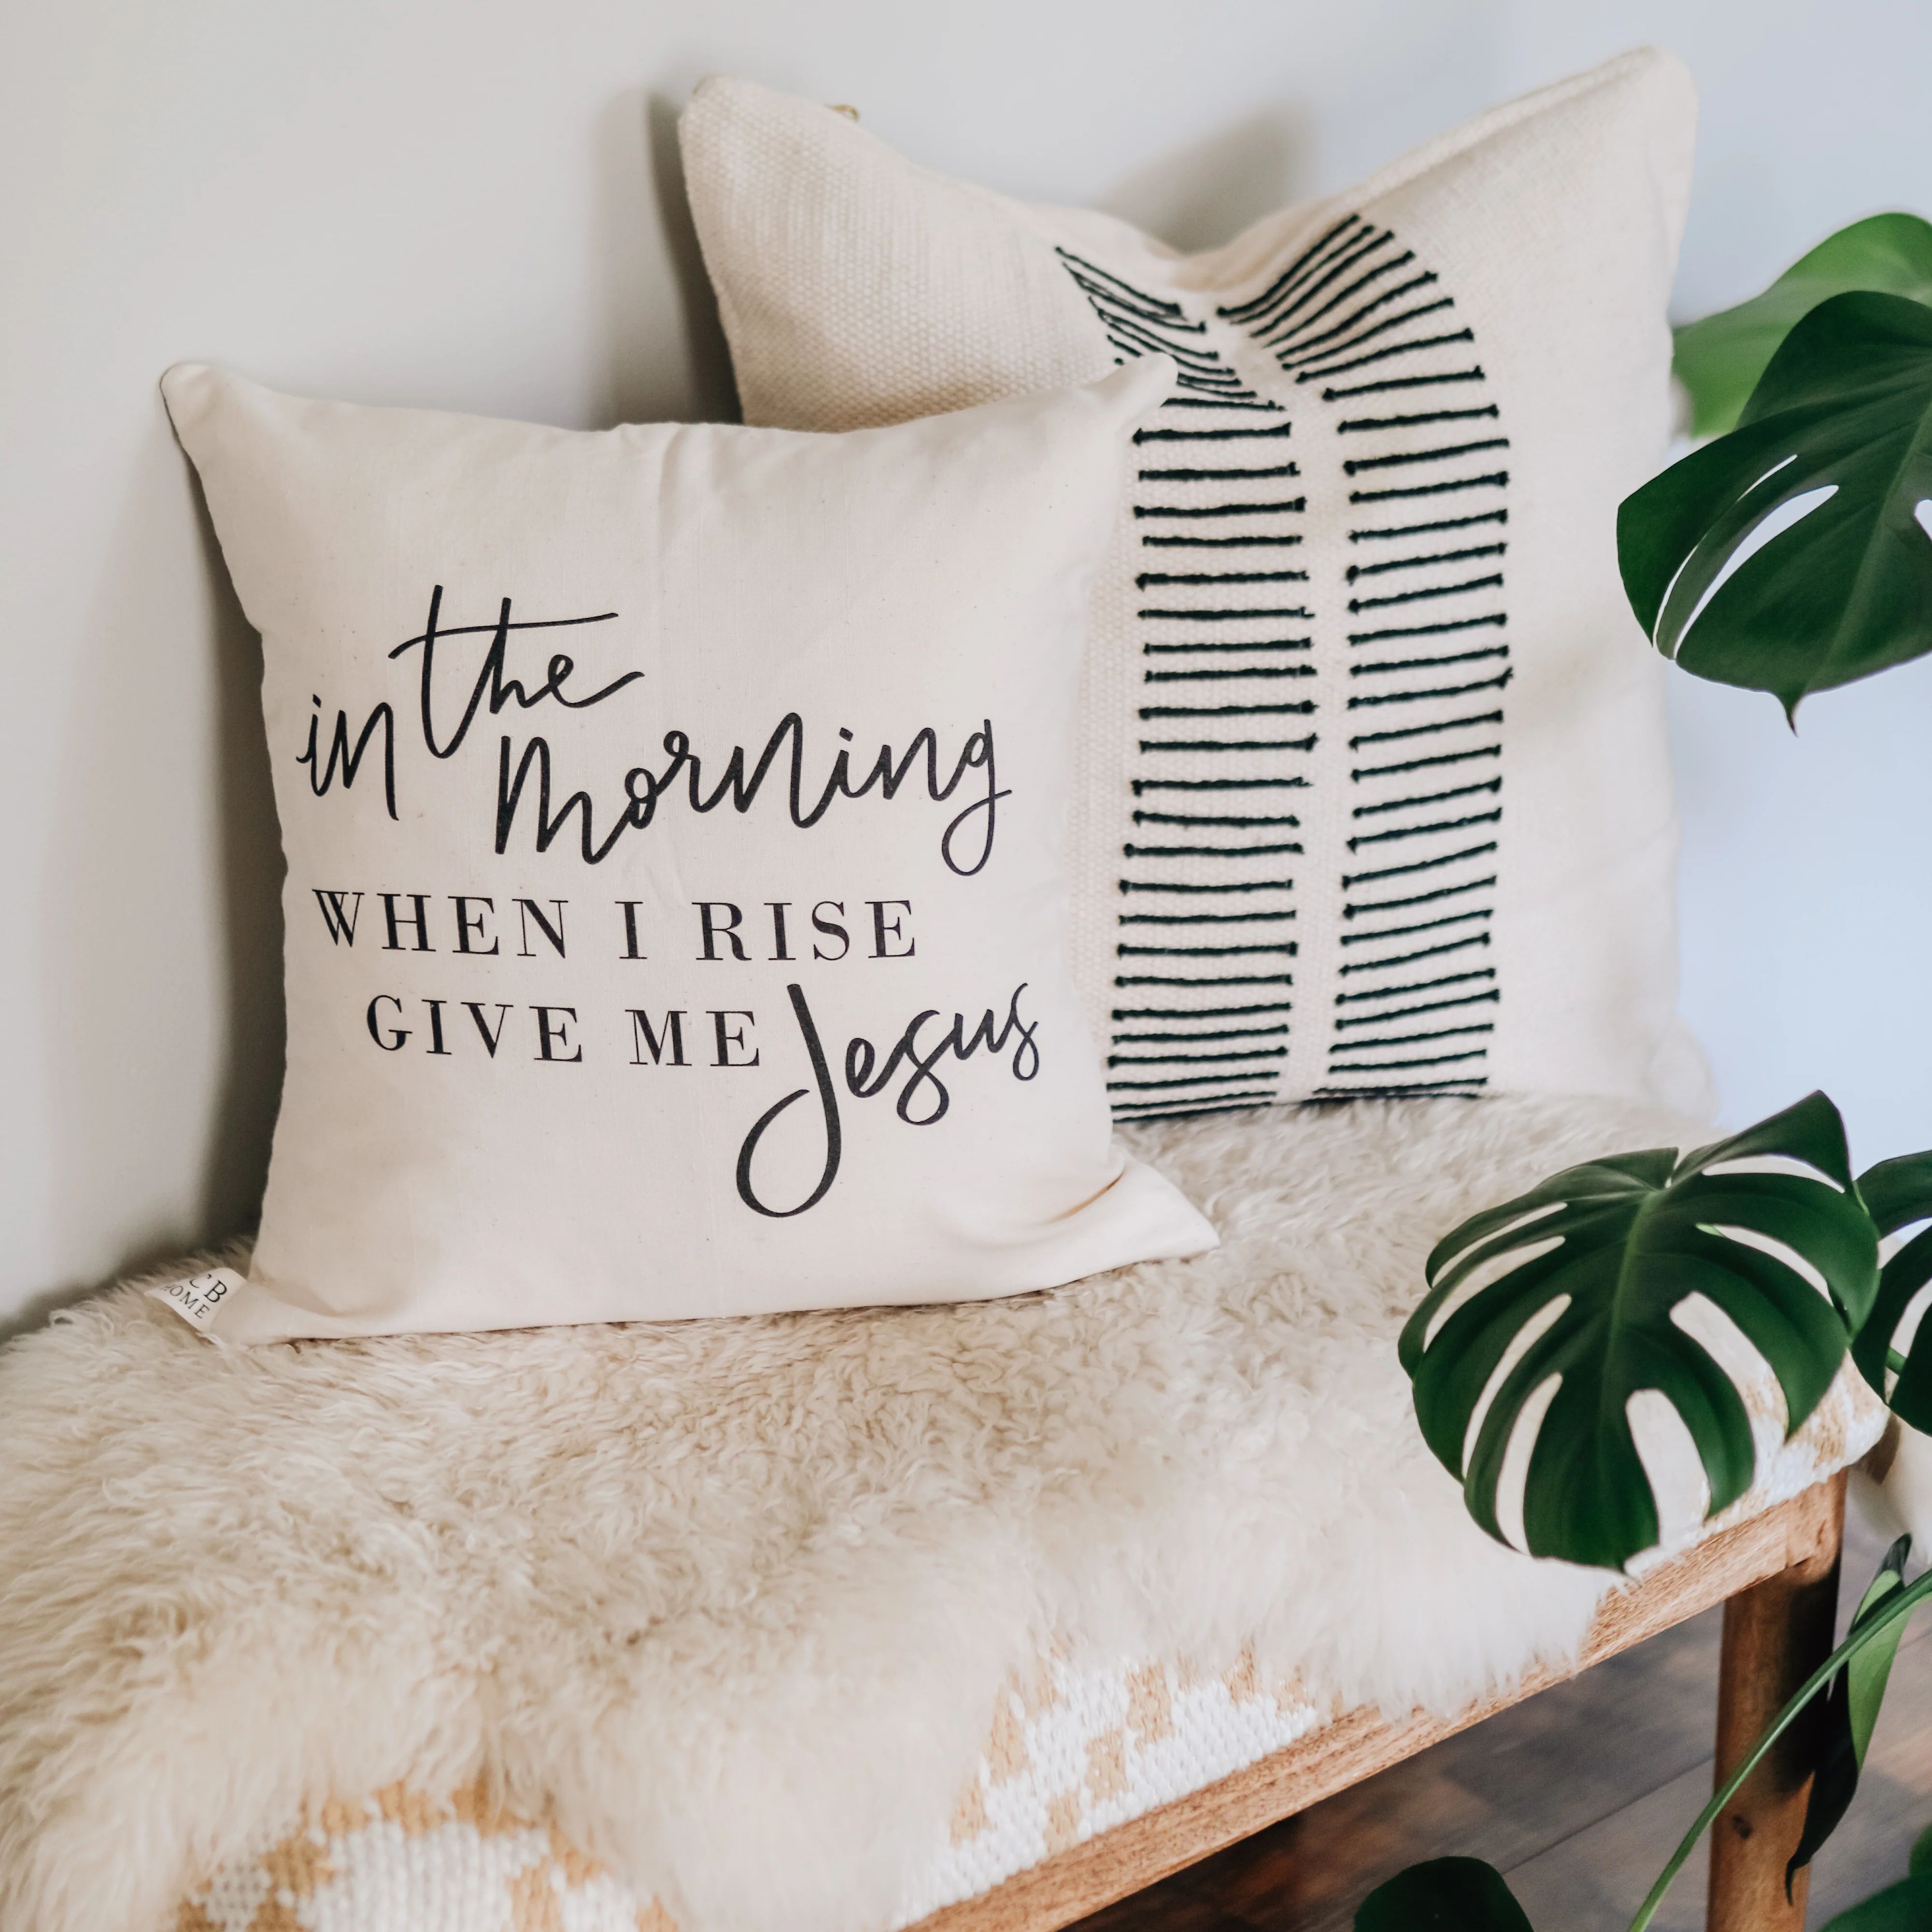 Give Me Jesus Pillow Cover | The Daily Grace Co.